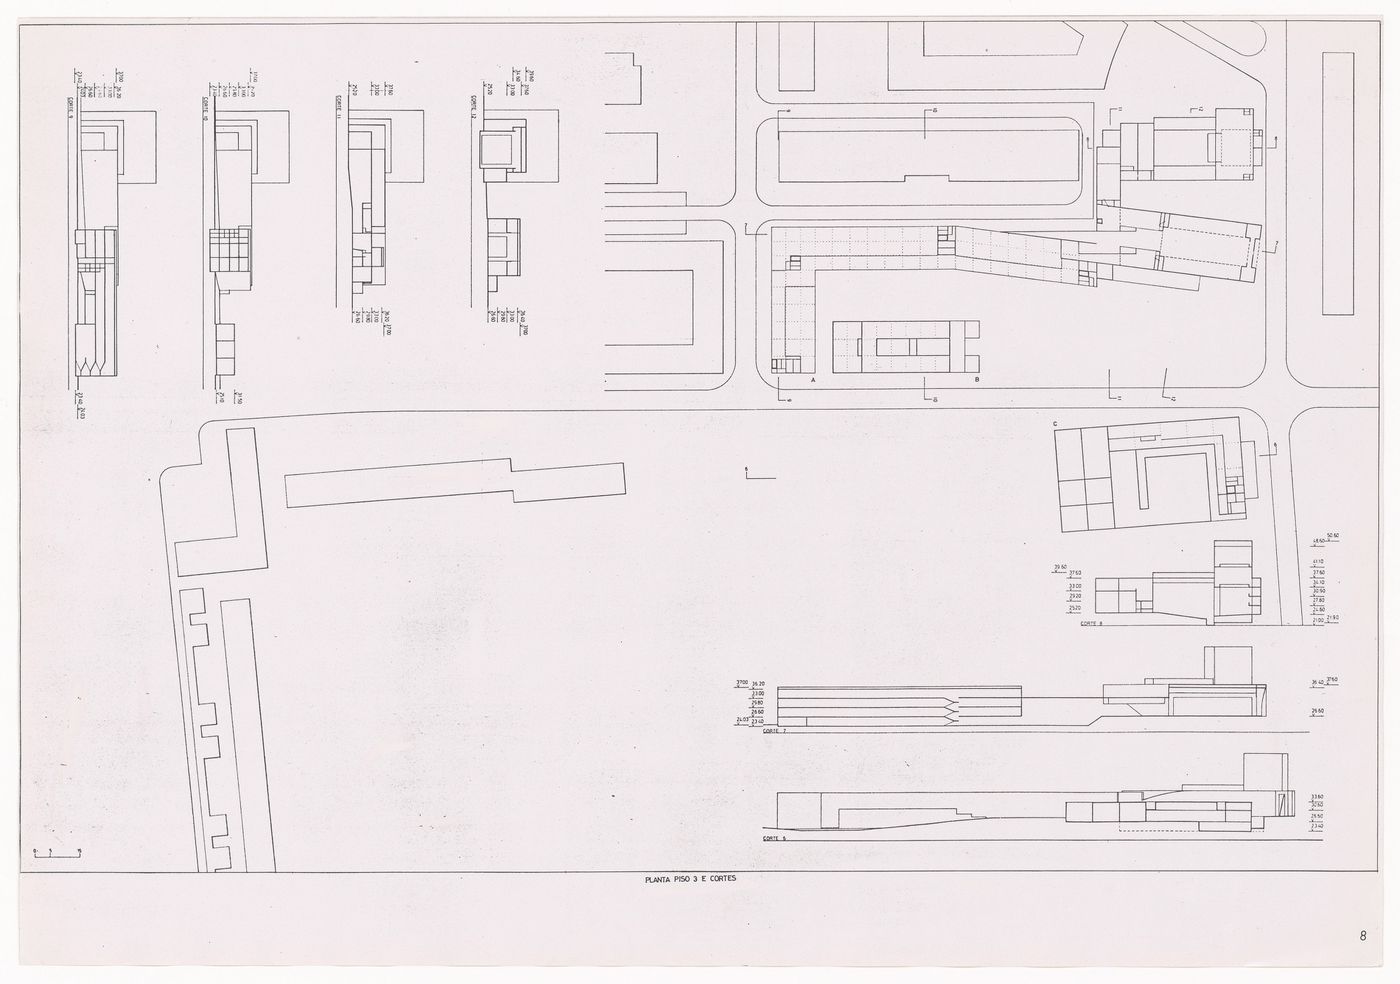 Plan and sections, study of the St-André cultural center, Centro Cultural de Sines, Sines